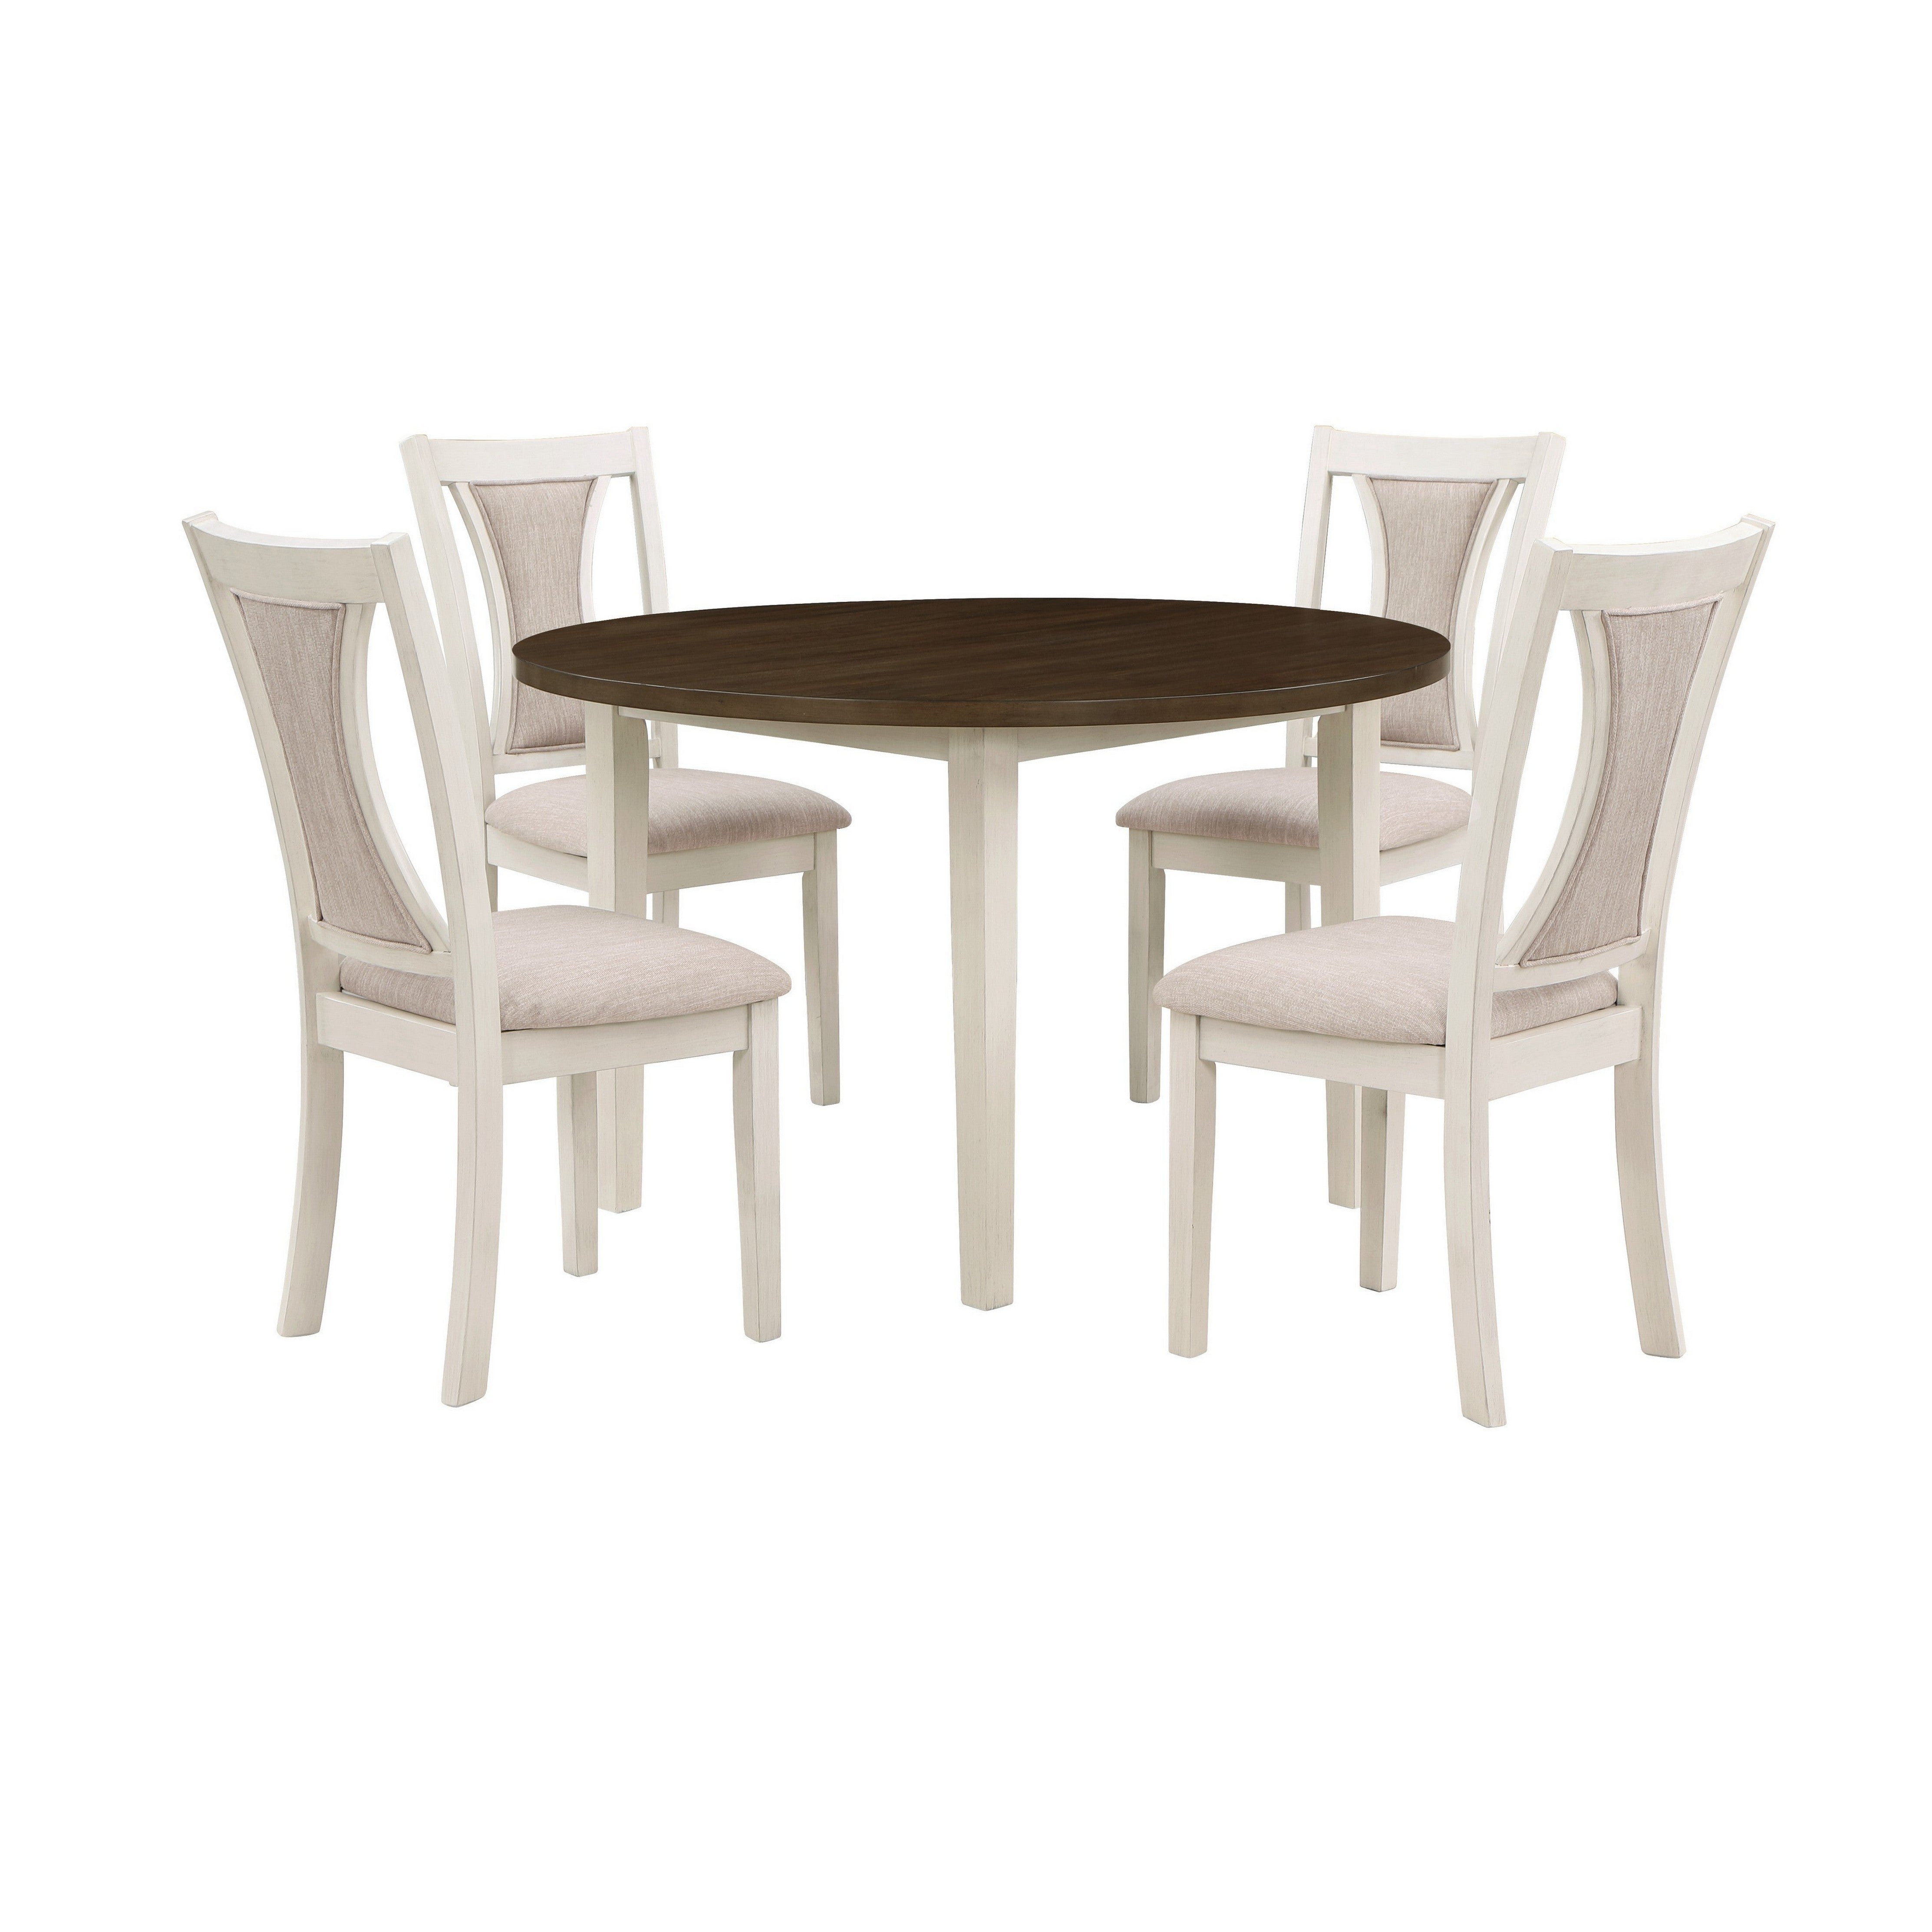 Hudson 48 Round Dining Table 4 Chair